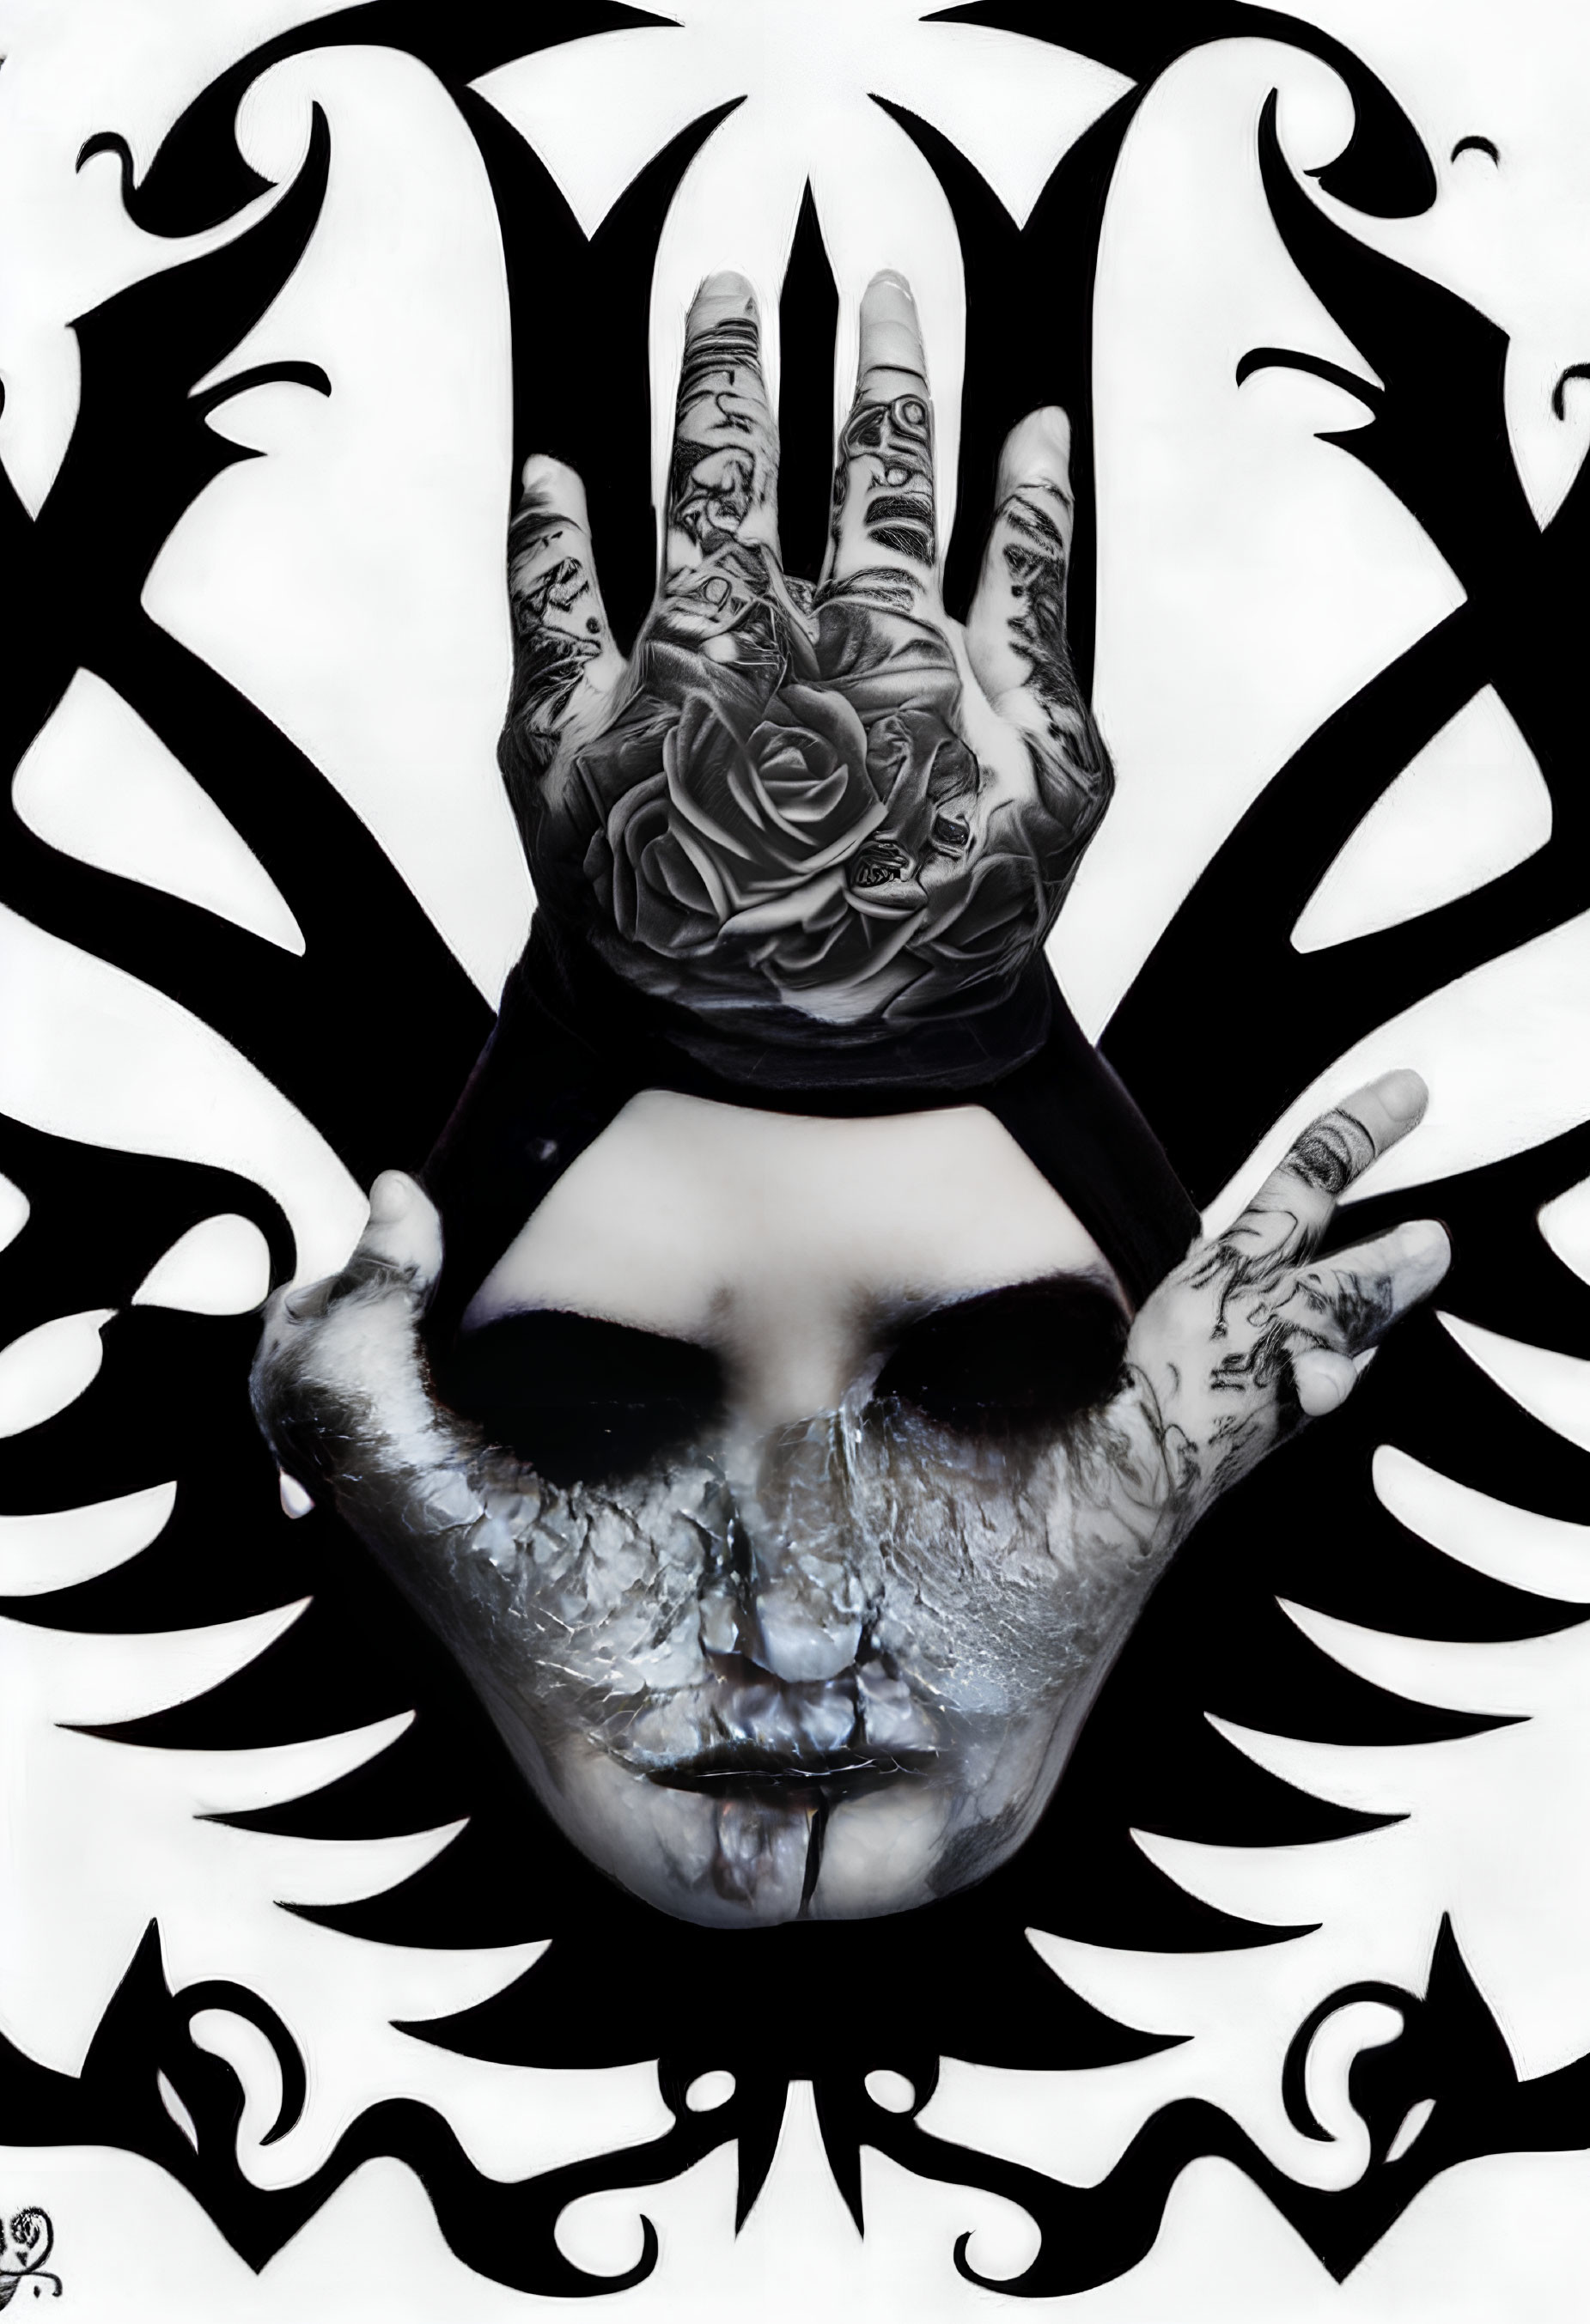 Monochrome artwork: Hand with rose tattoos on inkblot-style face.